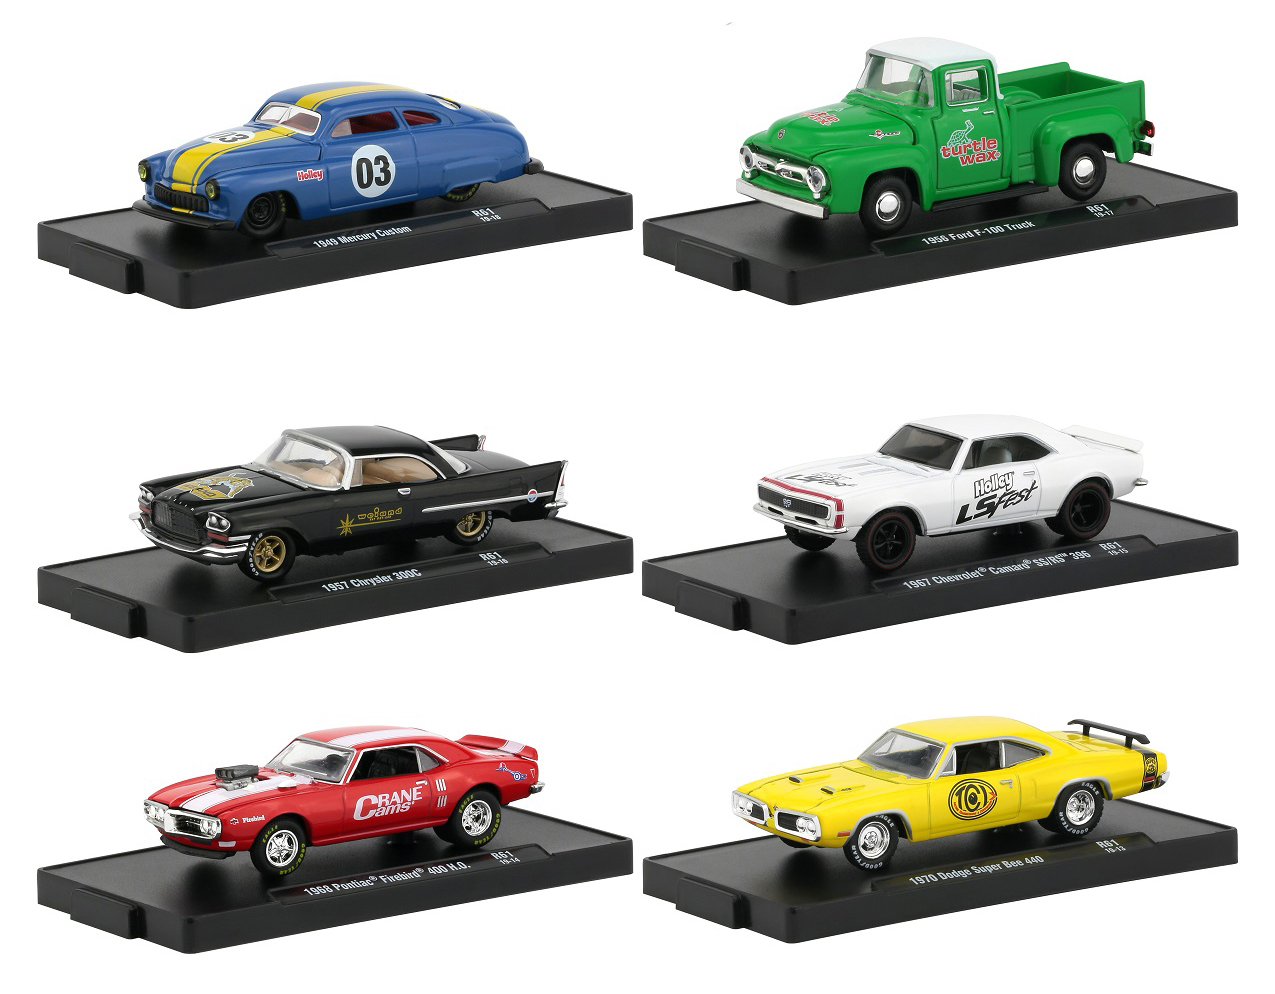 Drivers 6 Cars Set Release 61 In Blister Packs 1/64 Diecast Model Cars By M2 Machines